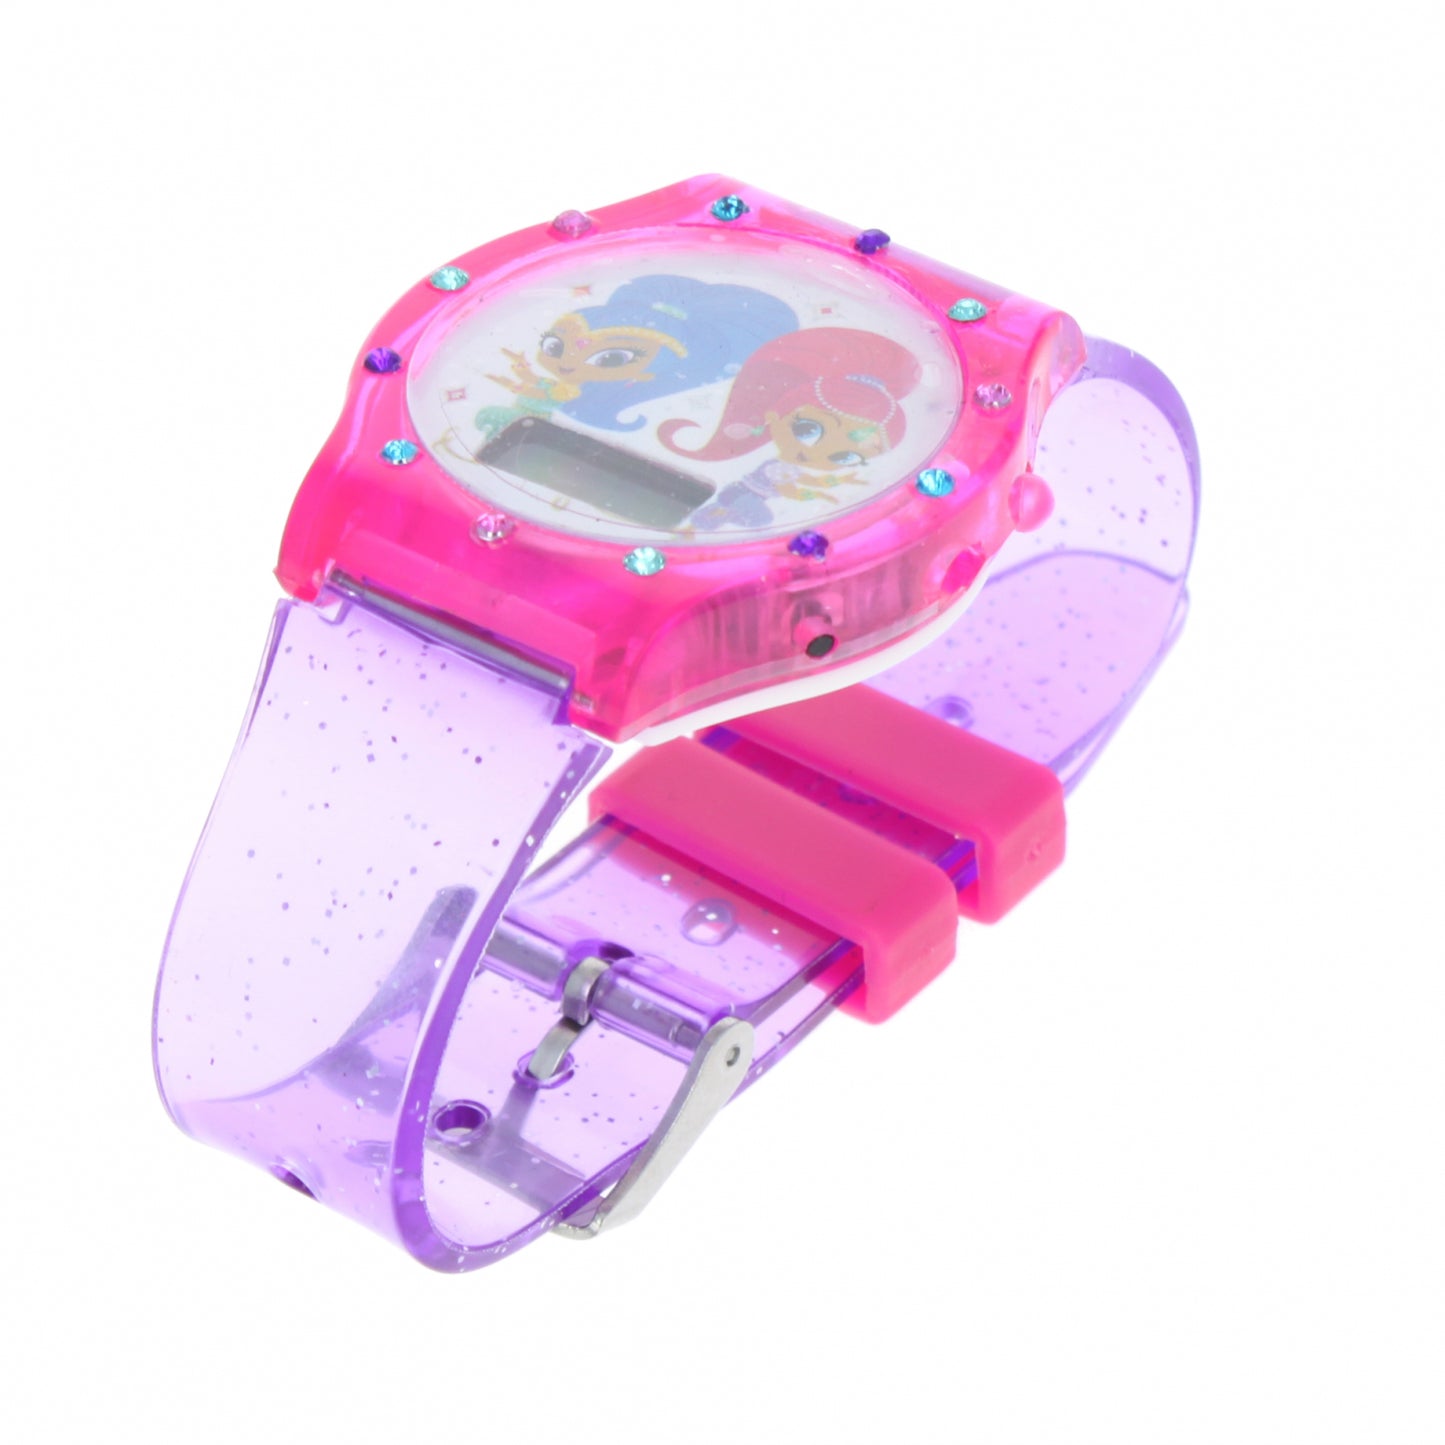 Licensed Digital & Touch LED Kids Watches Assorted: Shimer and Shine, Frozen, Disney Princess, Paw Patrol (1Pcs)